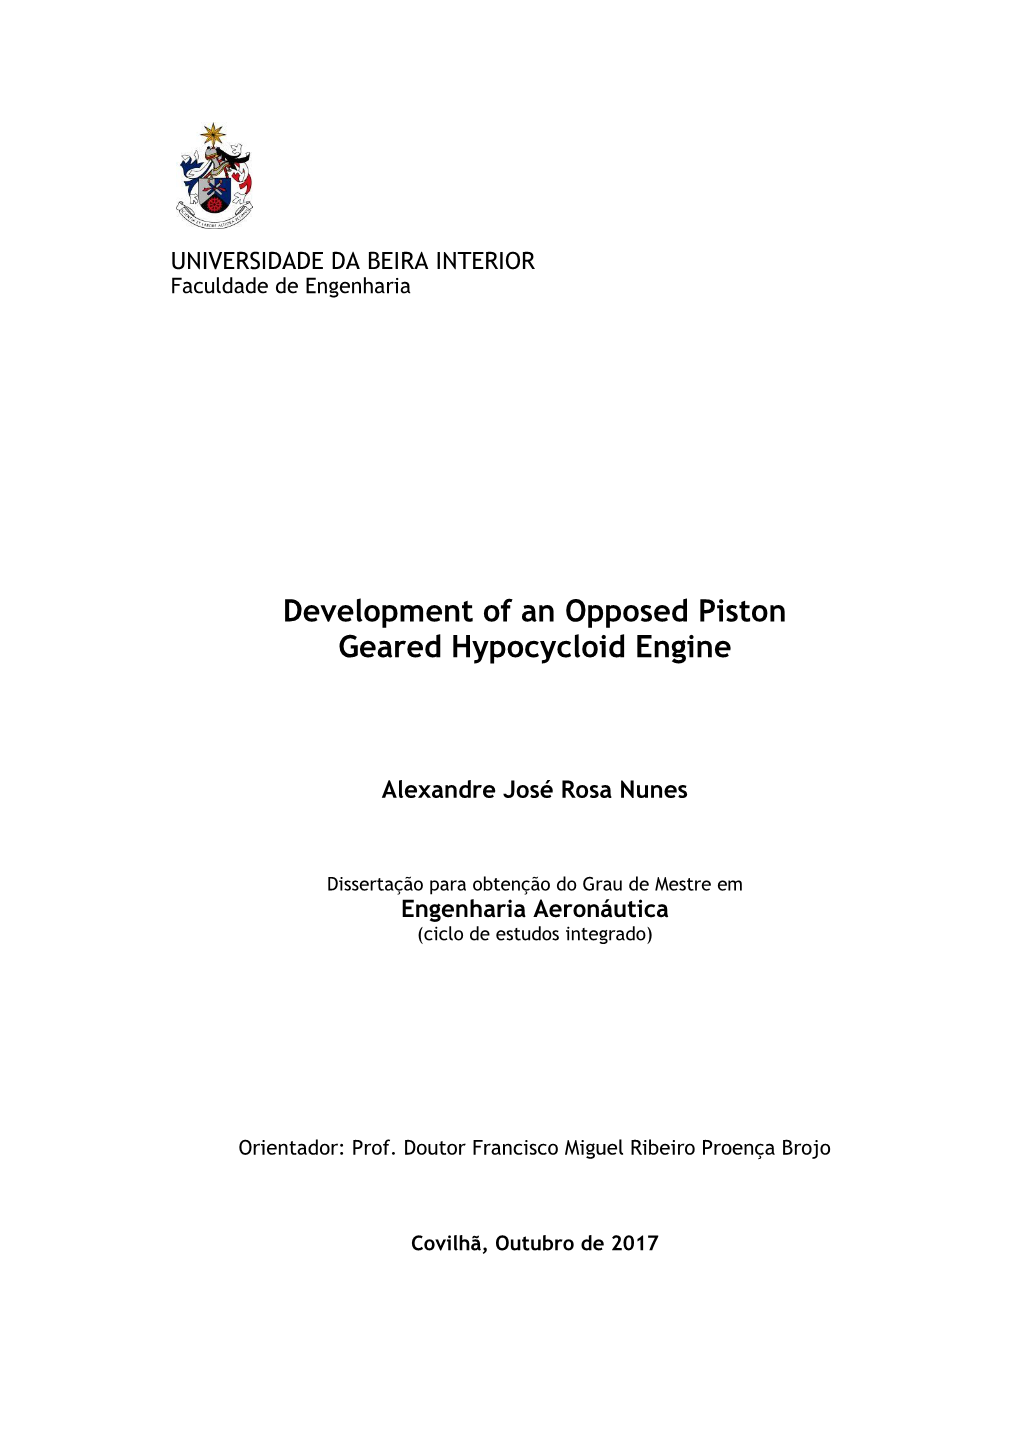 Development of an Opposed Piston Geared Hypocycloid Engine